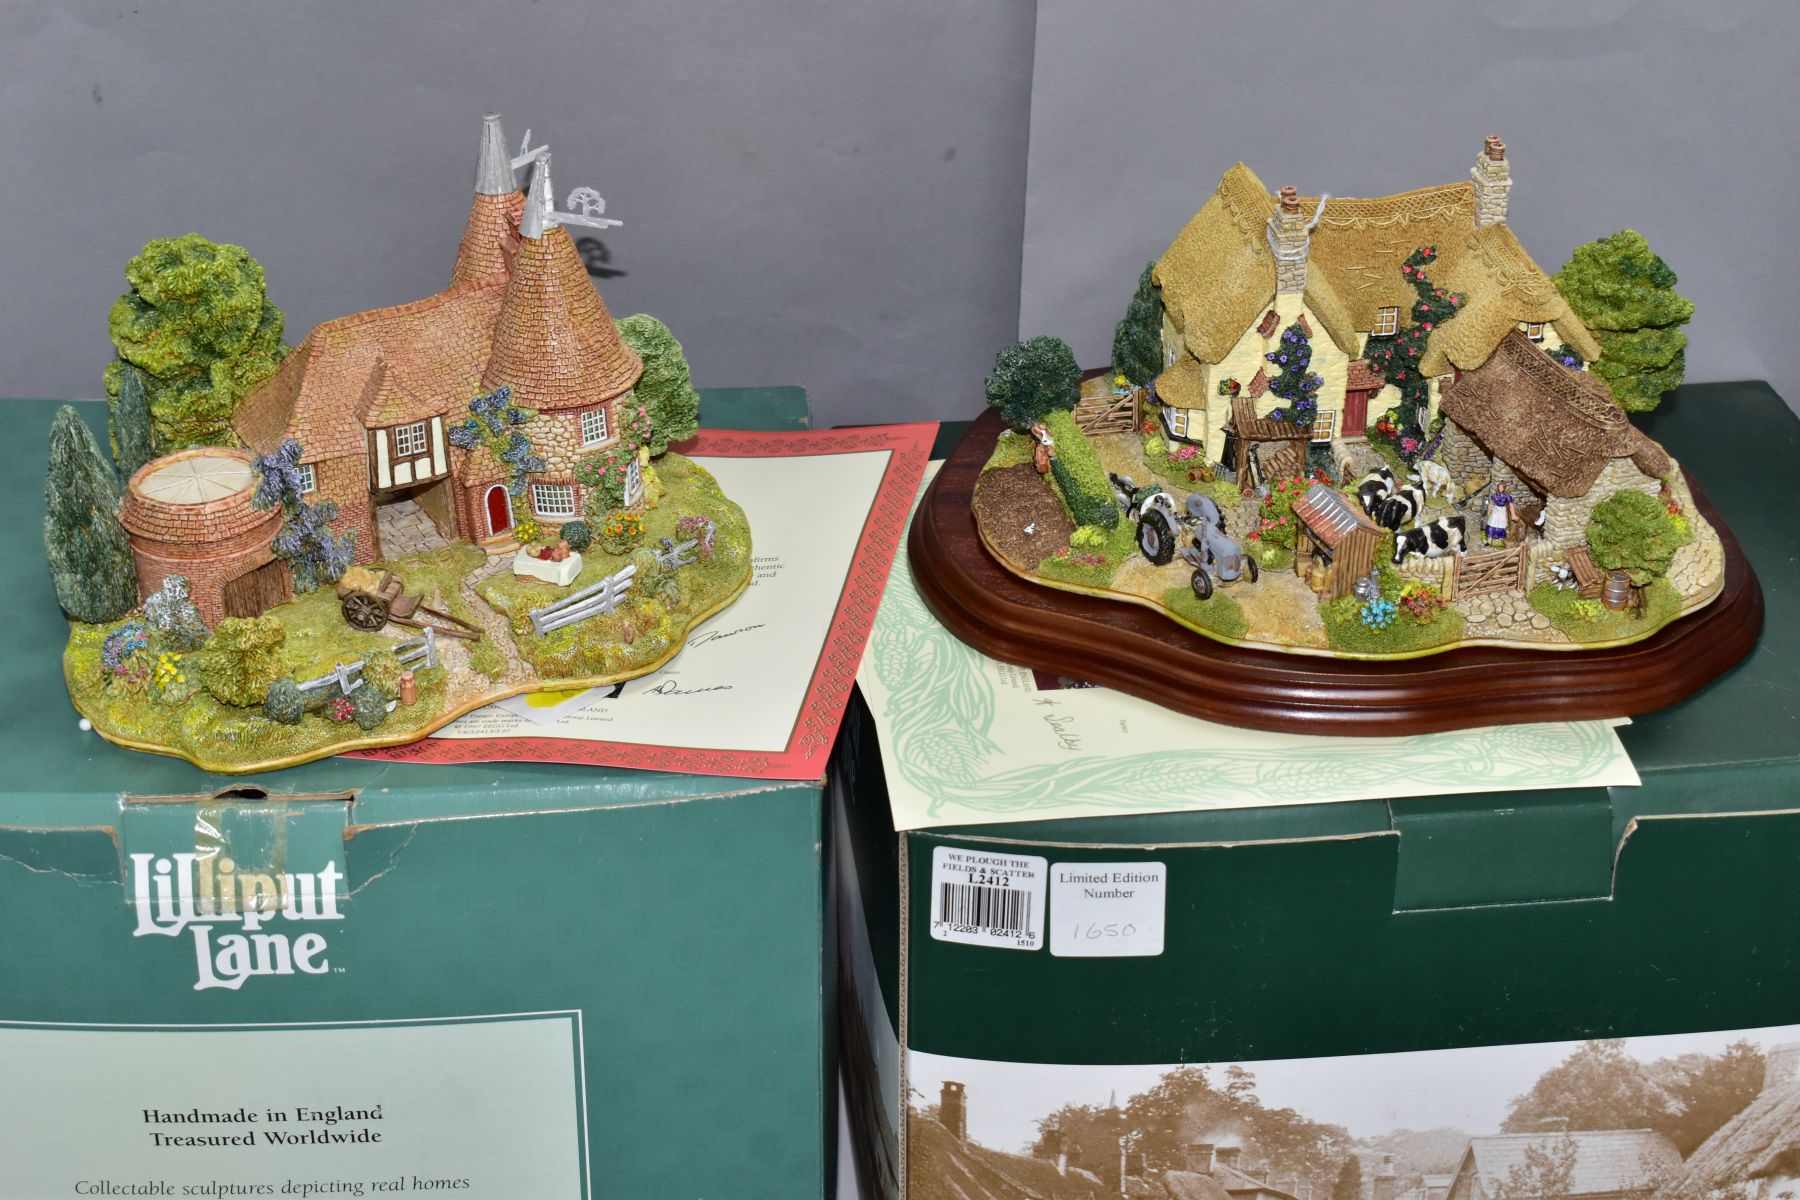 TWO BOXED LIMITED EDITION LILLIPUT LANE SCULPTURES, 'We Plough The Fields & Scatter' L2412, No